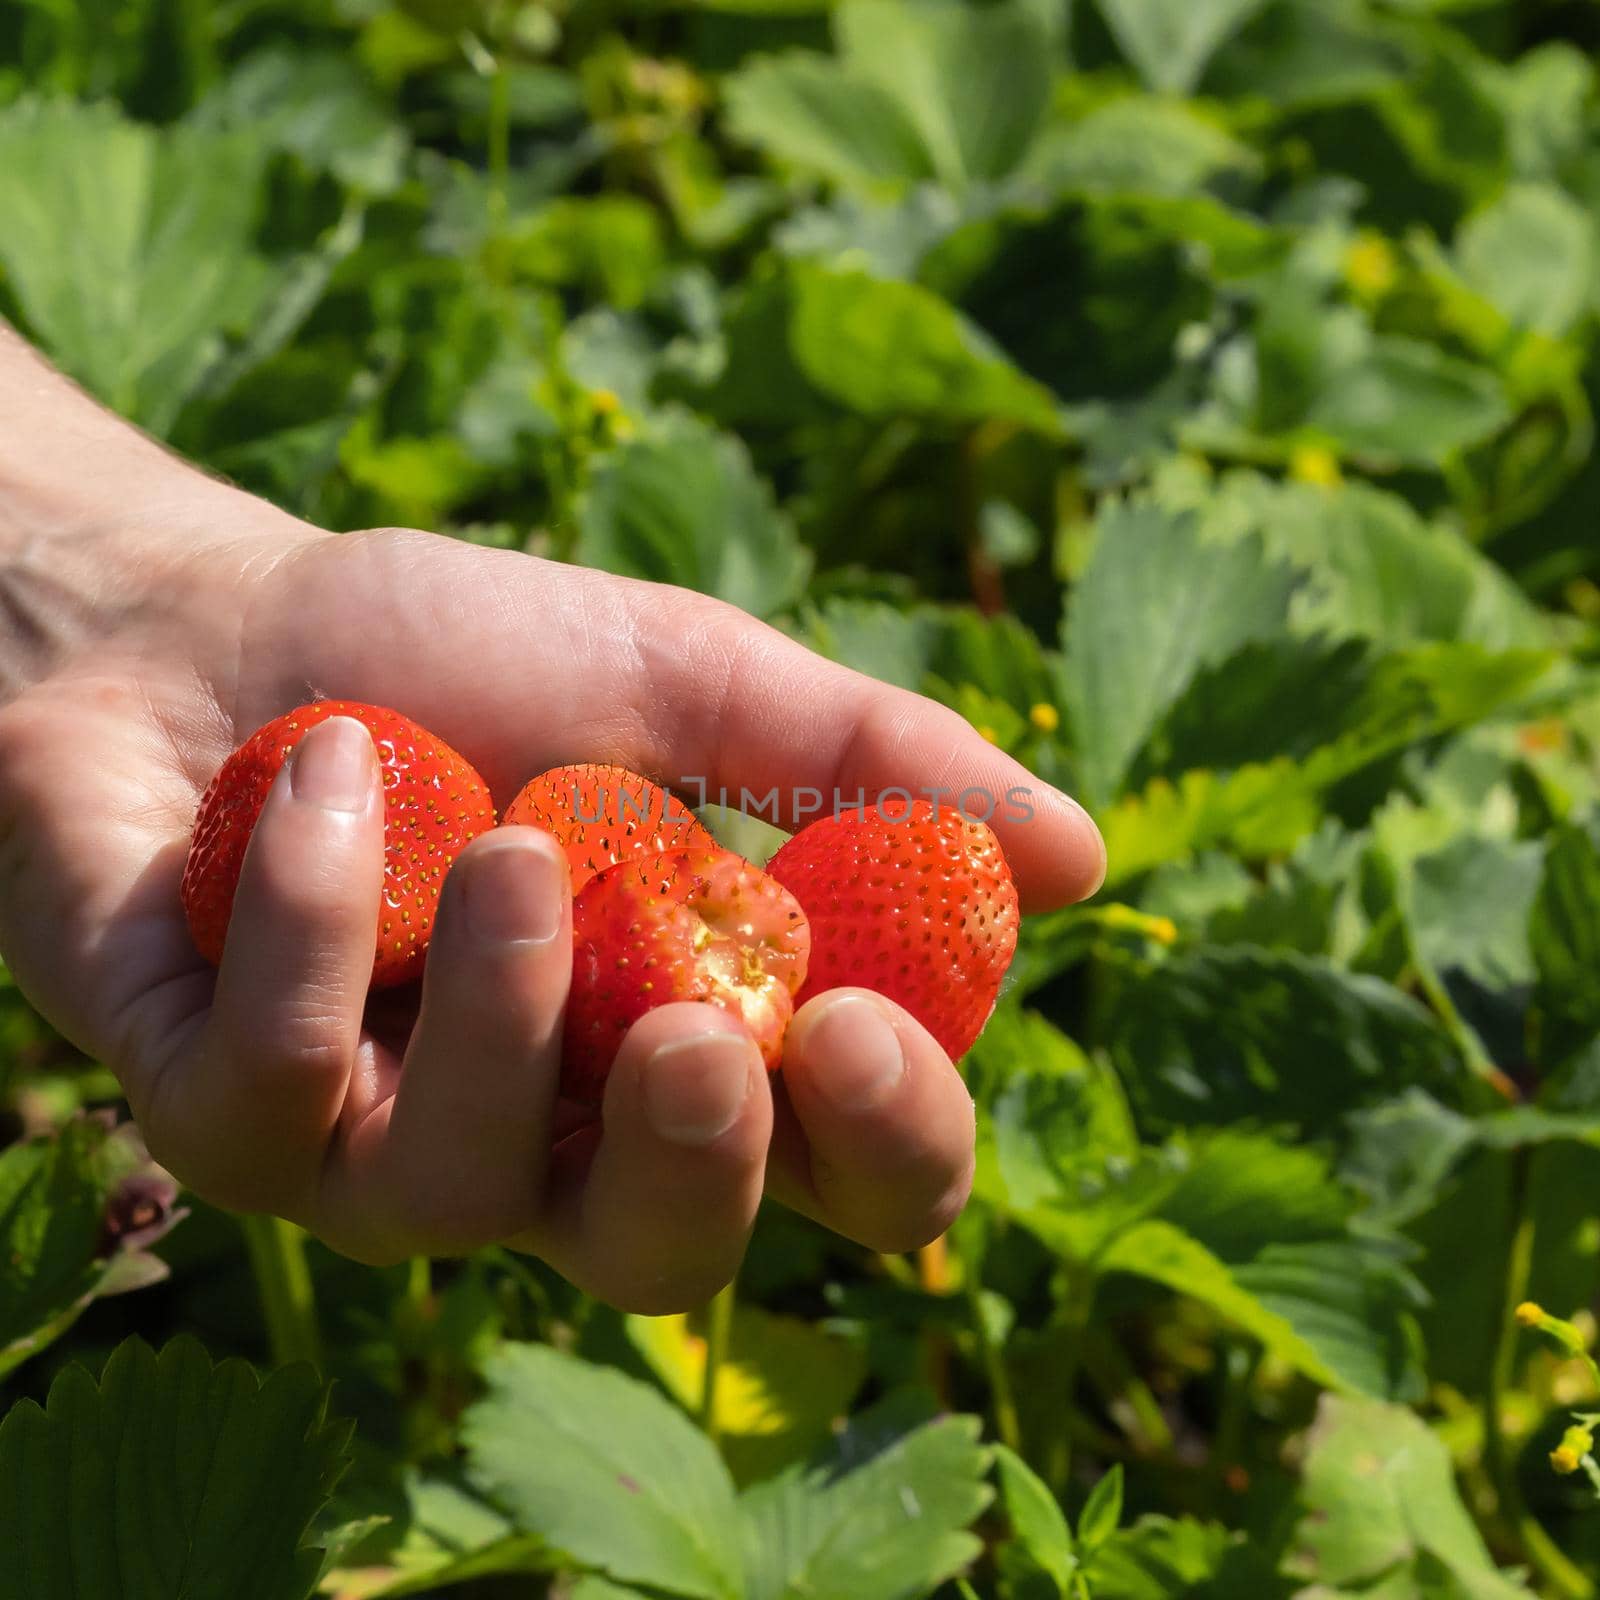 Female hands hold a handful of juicy ripe red strawberries, the girl harvests berries in her garden.